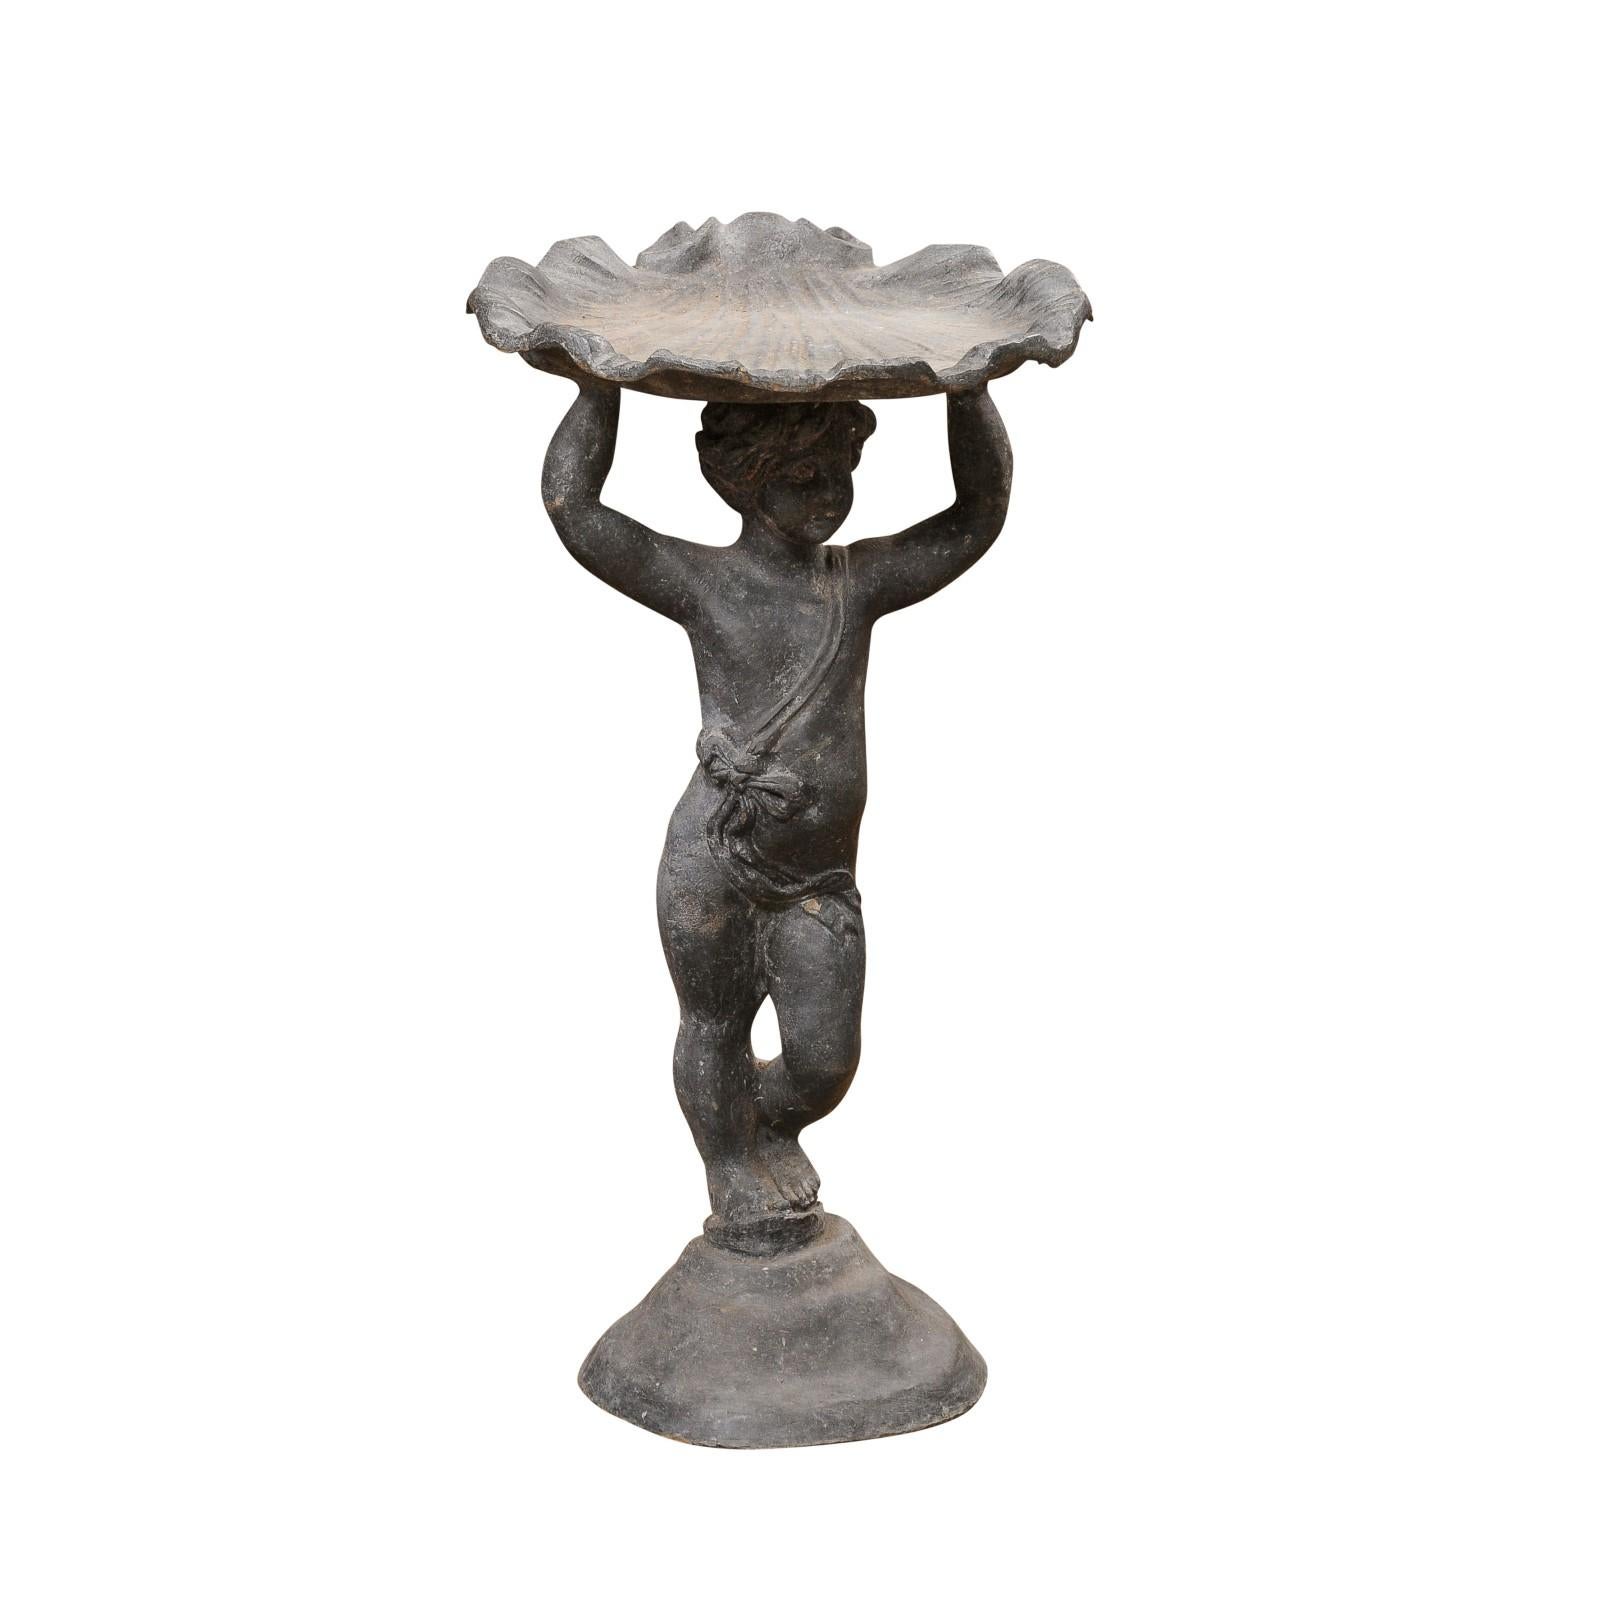 An English Greco-Roman style iron bird bath from the 20th century depicting a standing cherub carrying a sea shell on his head. Experience the enchanting fusion of English craftsmanship and Greco-Roman artistry with this 20th-century iron bird bath,